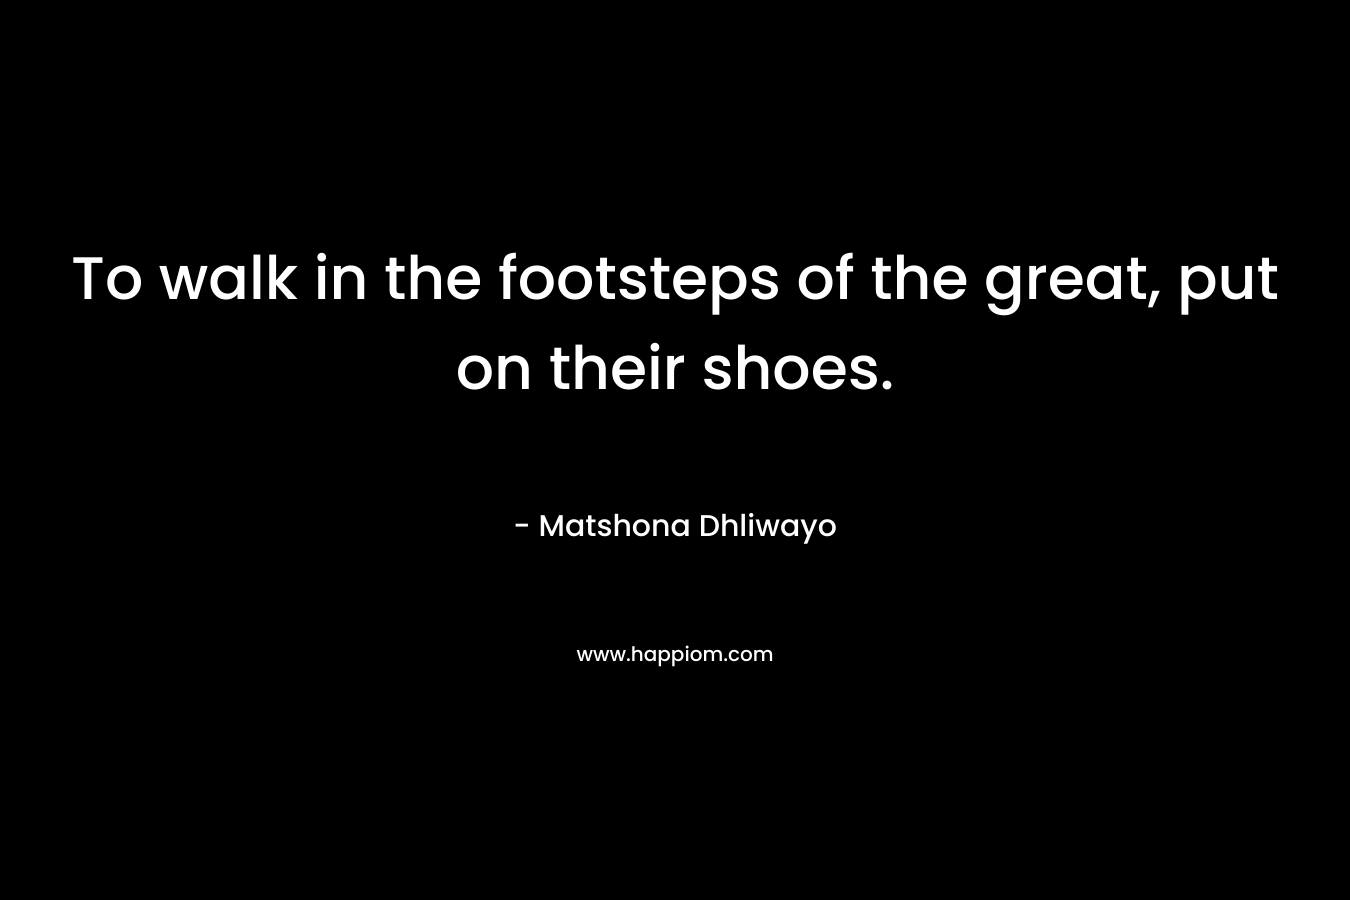 To walk in the footsteps of the great, put on their shoes.